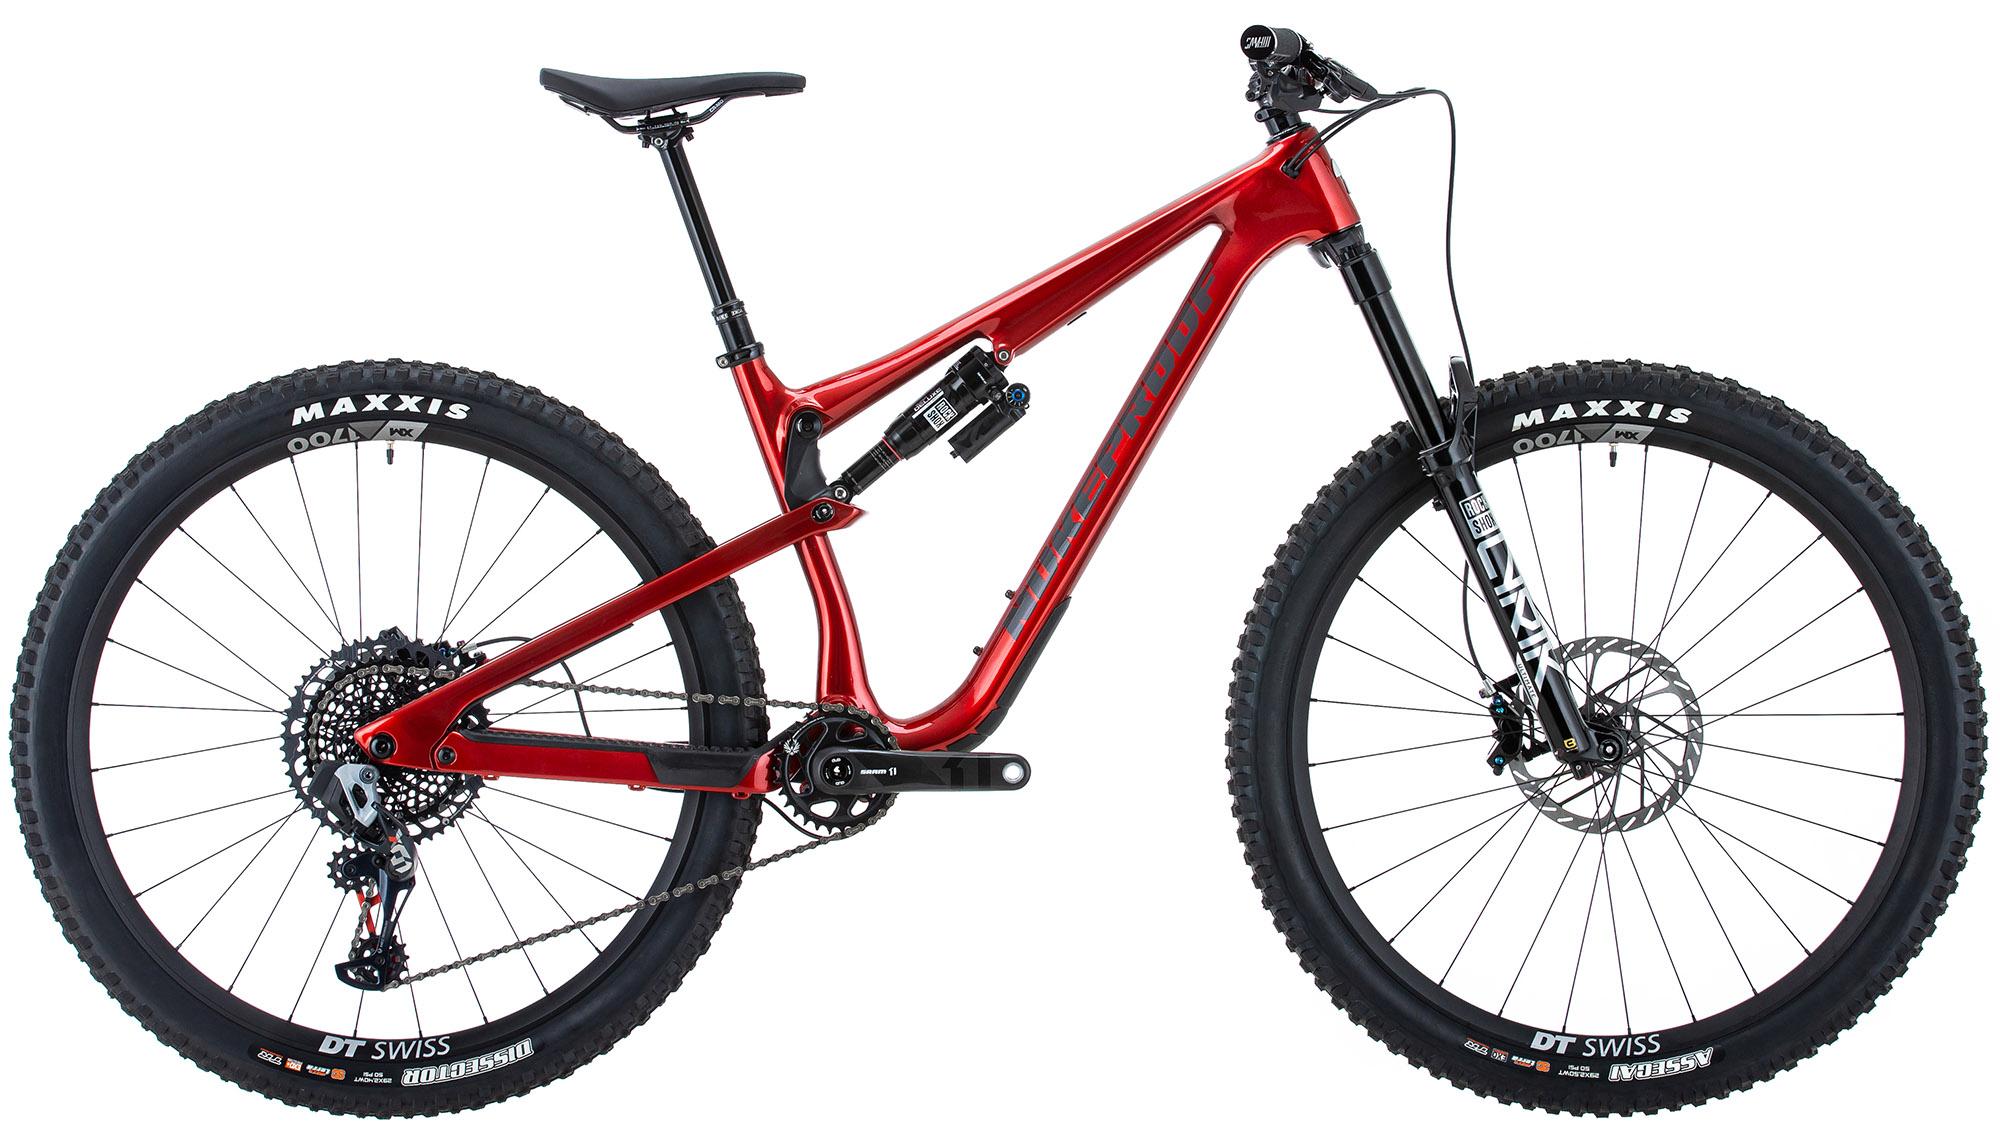 Nukeproof Reactor 290 Rs Carbon Bike (x01 Axs)  Racing Red